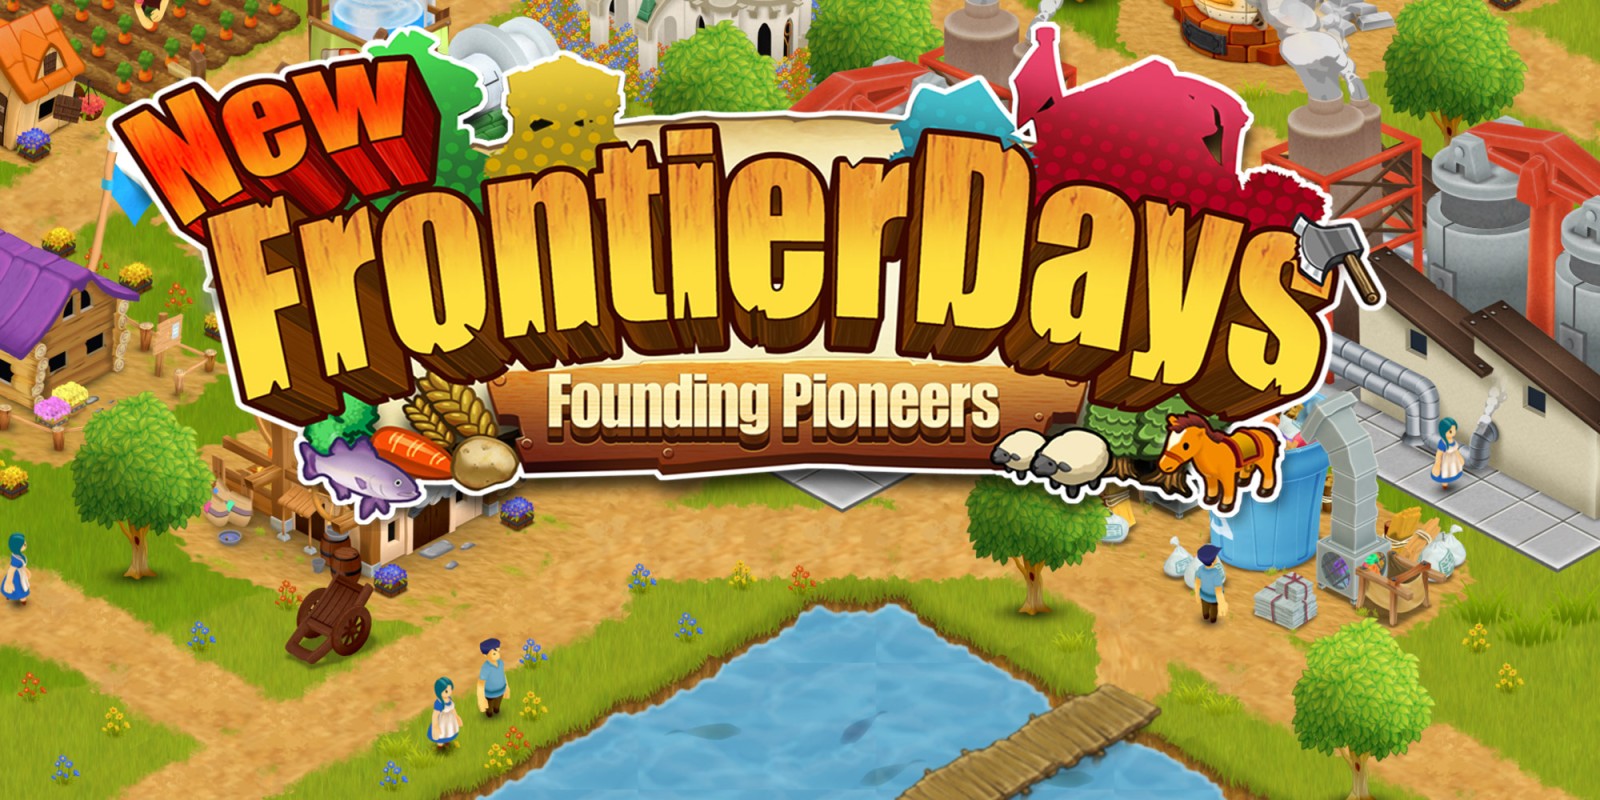 New Frontier Days ~Founding | Nintendo Switch download software | Games | Nintendo